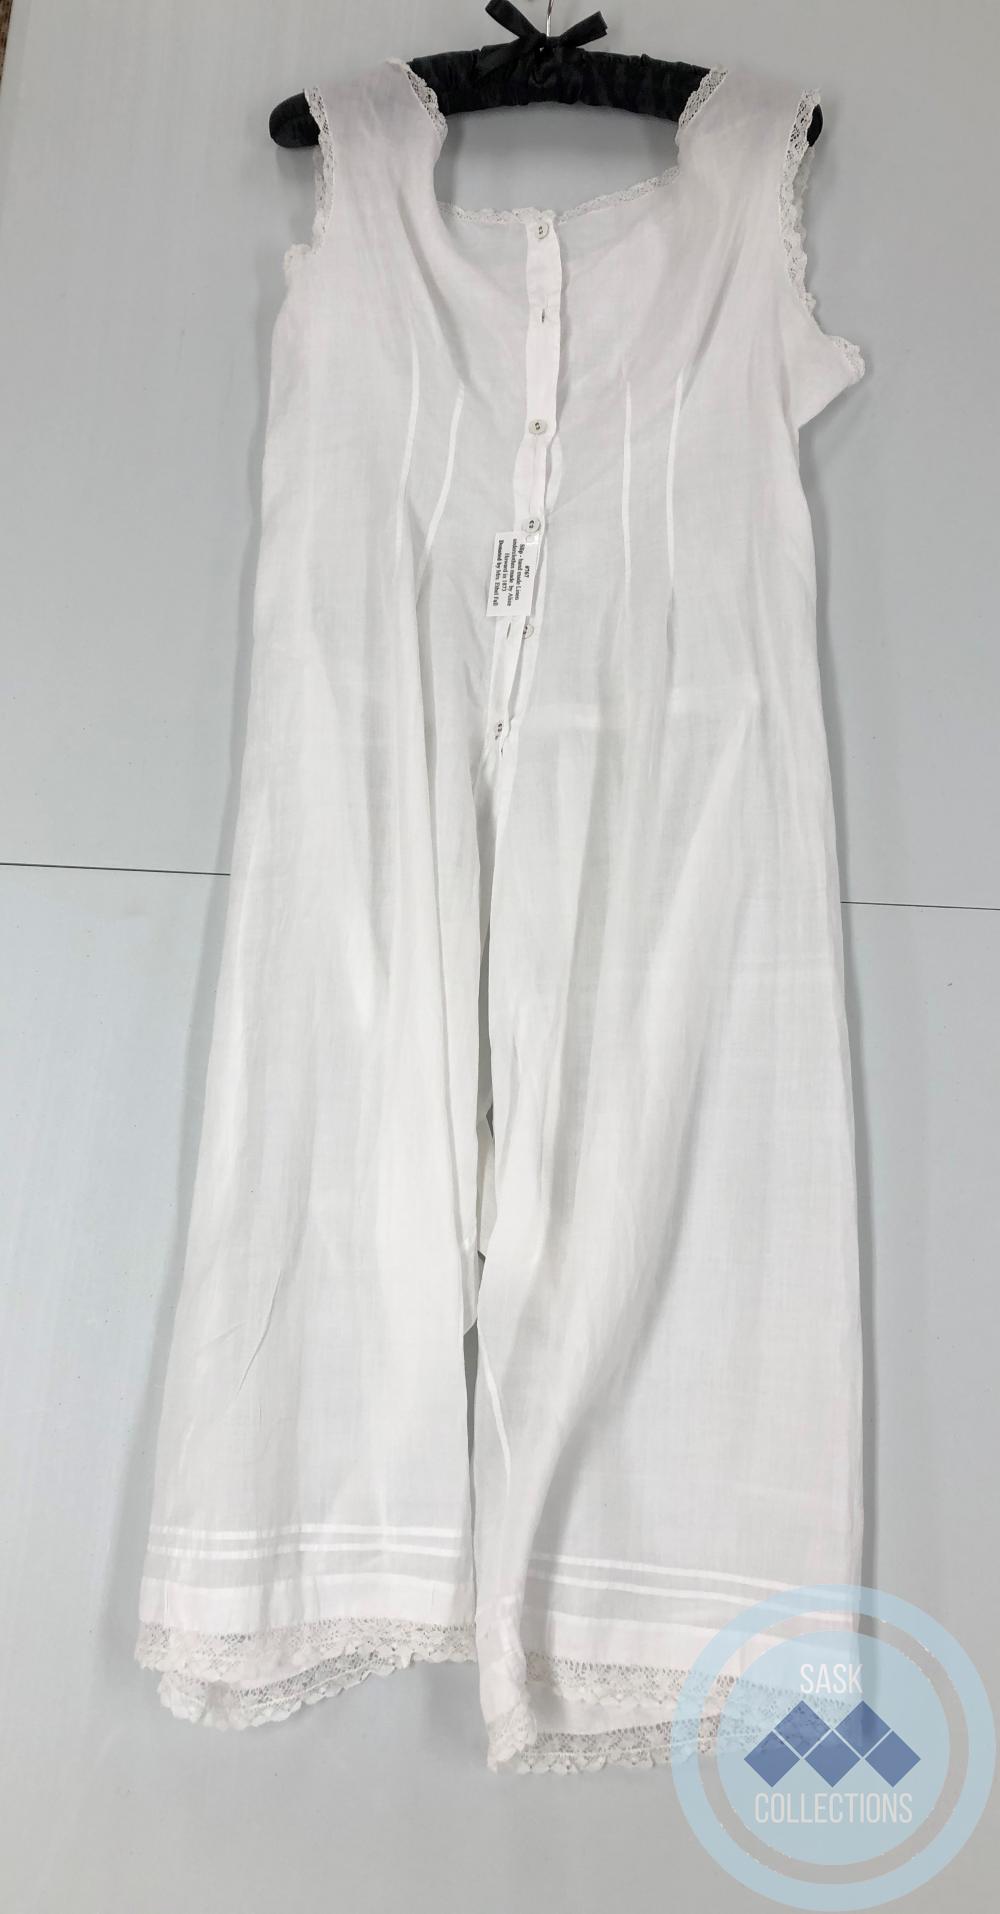 Slip - hand made Linen underclothes made  by Alice Howard in 1873